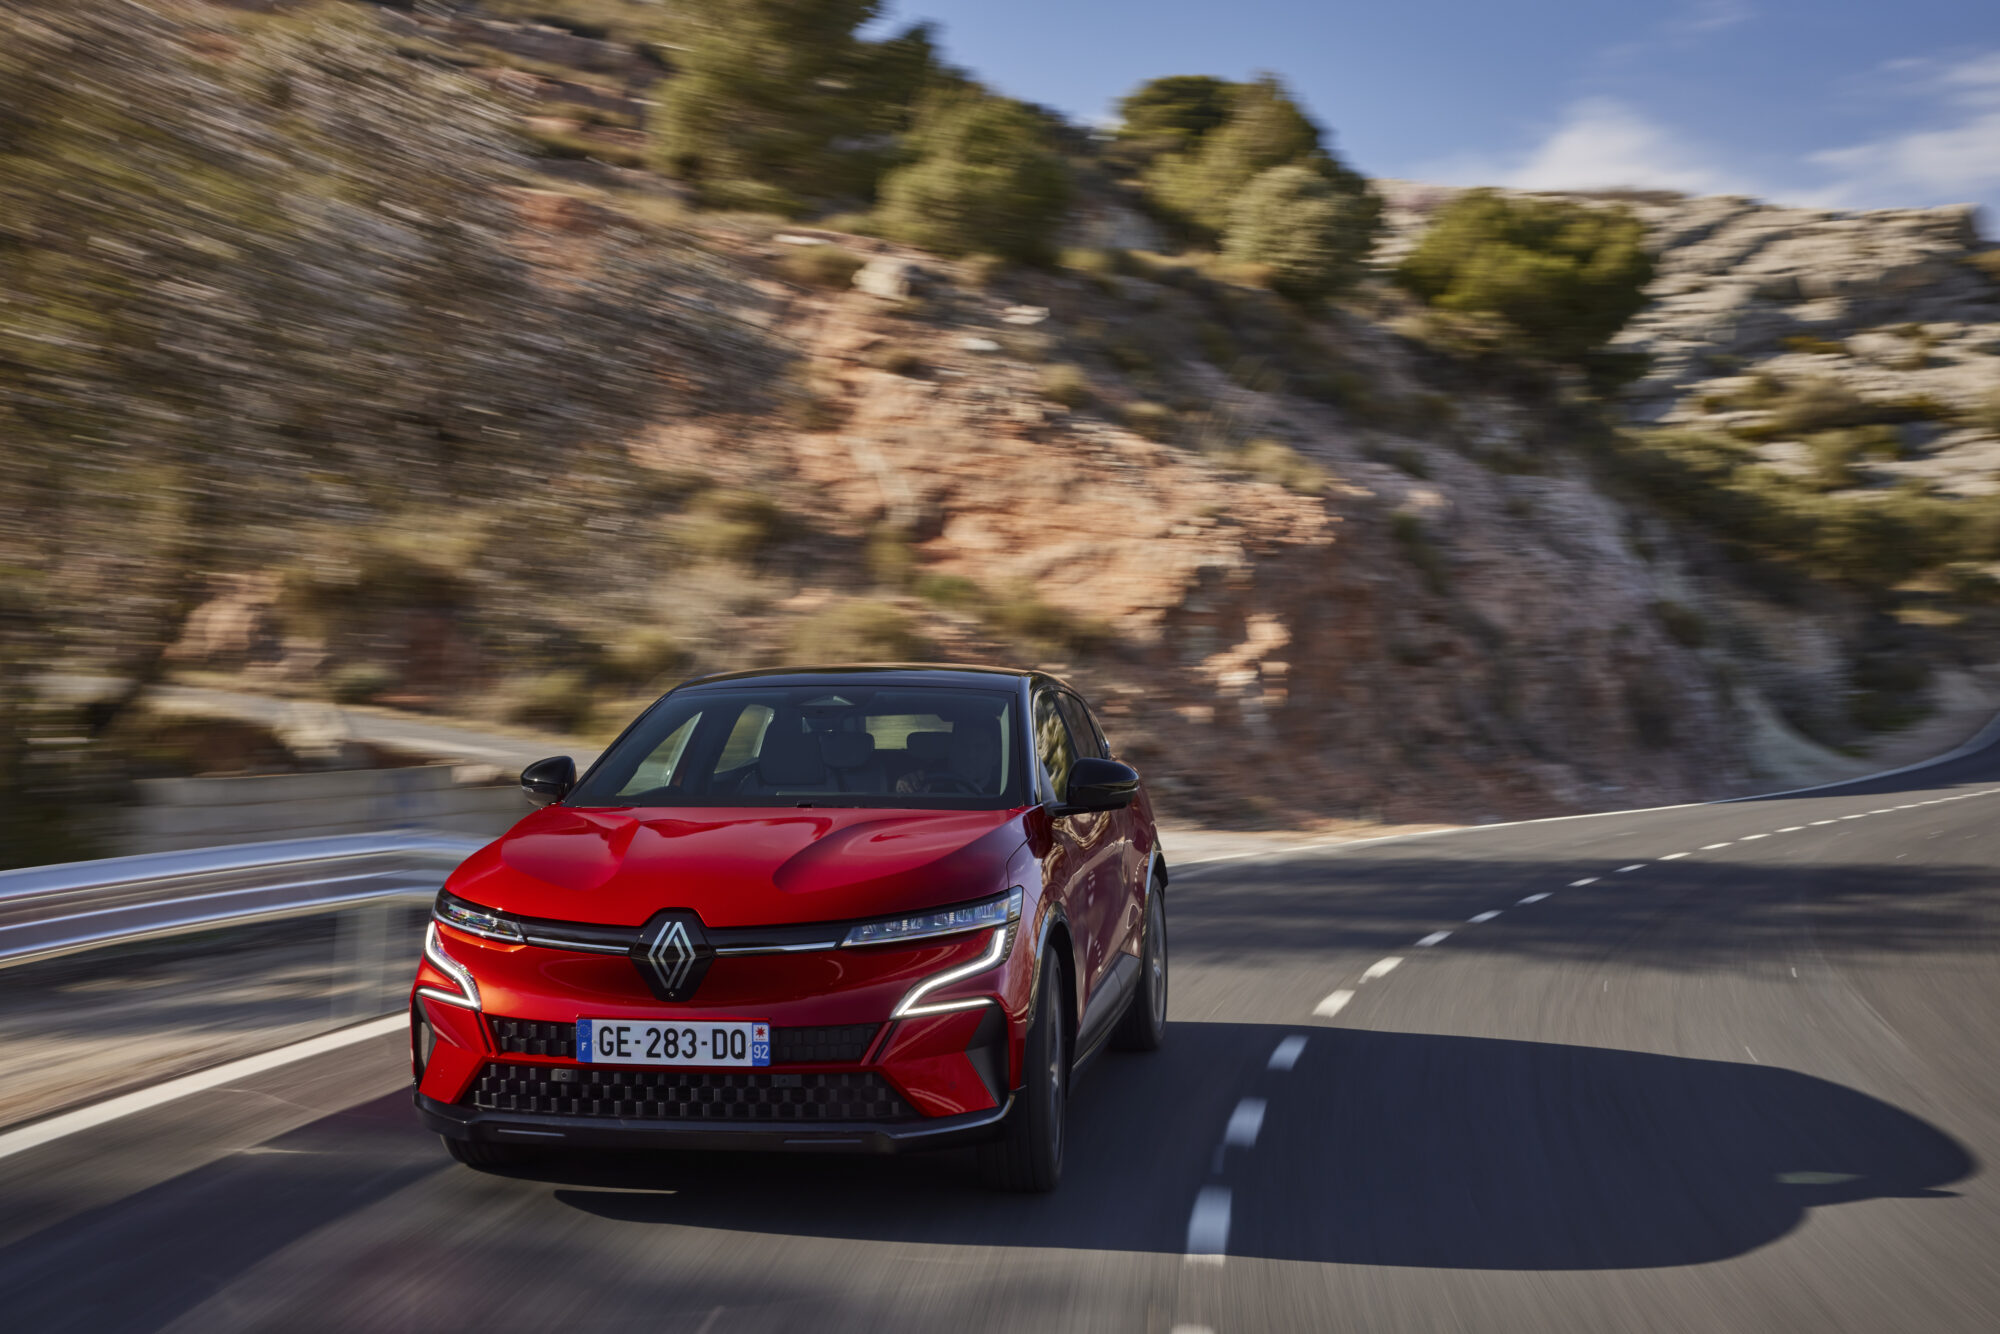 All-New Renault MEGANE E-TECH Electric - Techno version - Flame Red - Drive tests